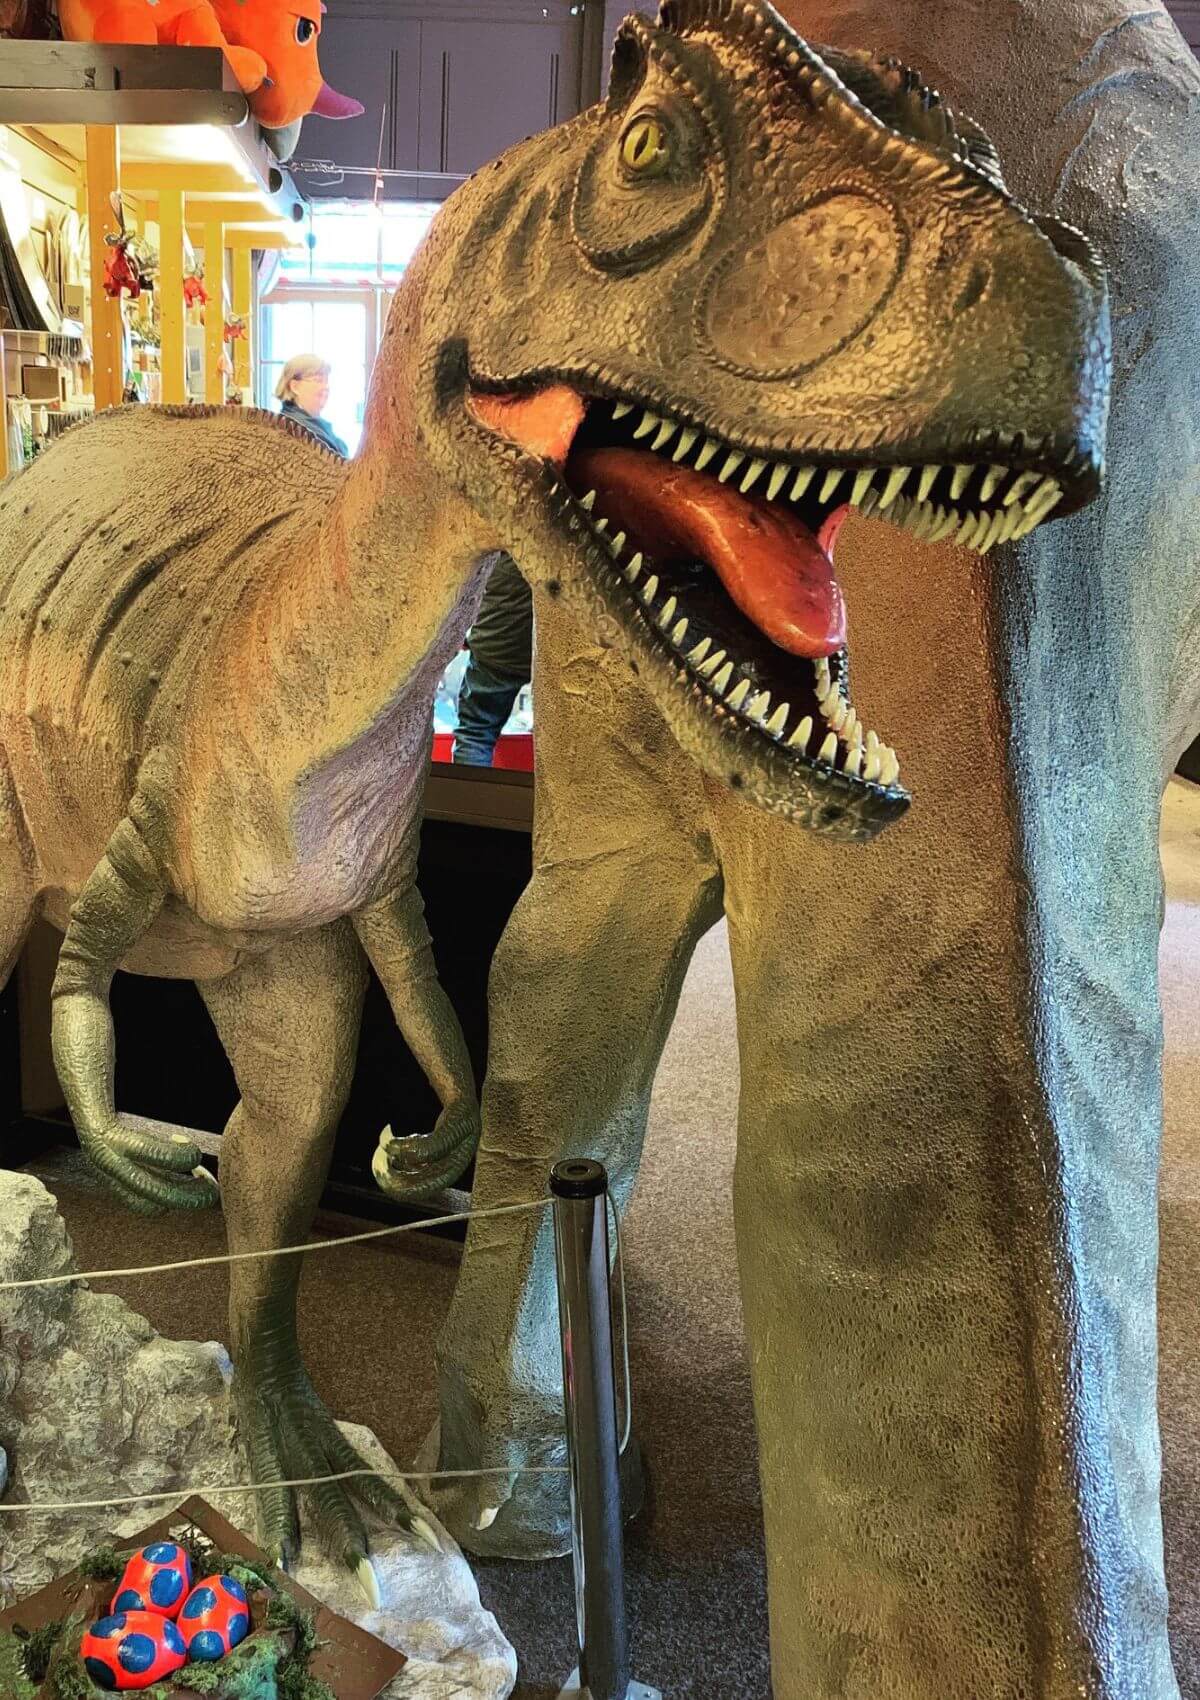 Day out at the The Dinosaur Museum, Dorchester, England